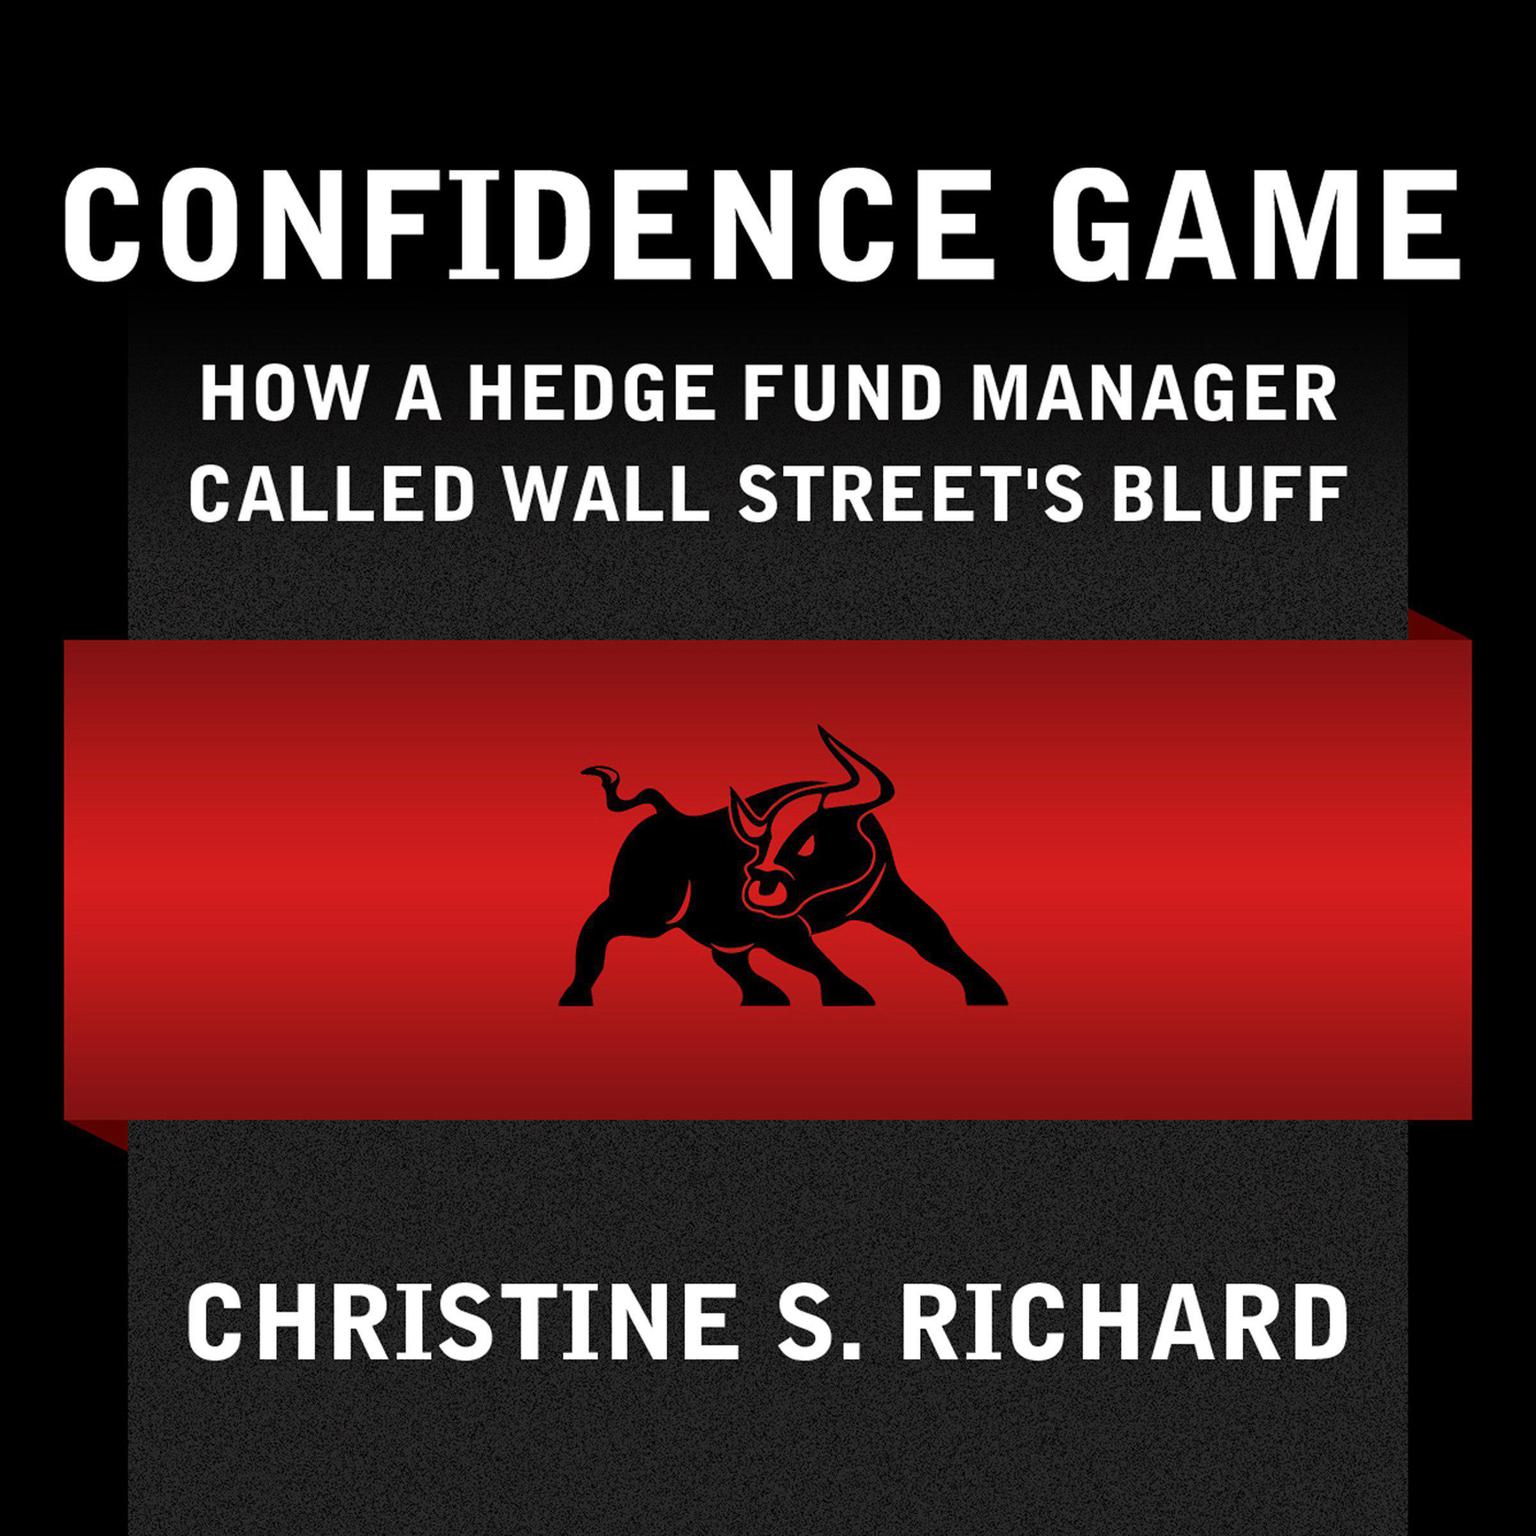 Confidence Game: How Hedge Fund Manager Bill Ackman Called Wall Streets Bluff Audiobook, by Christine S. Richard